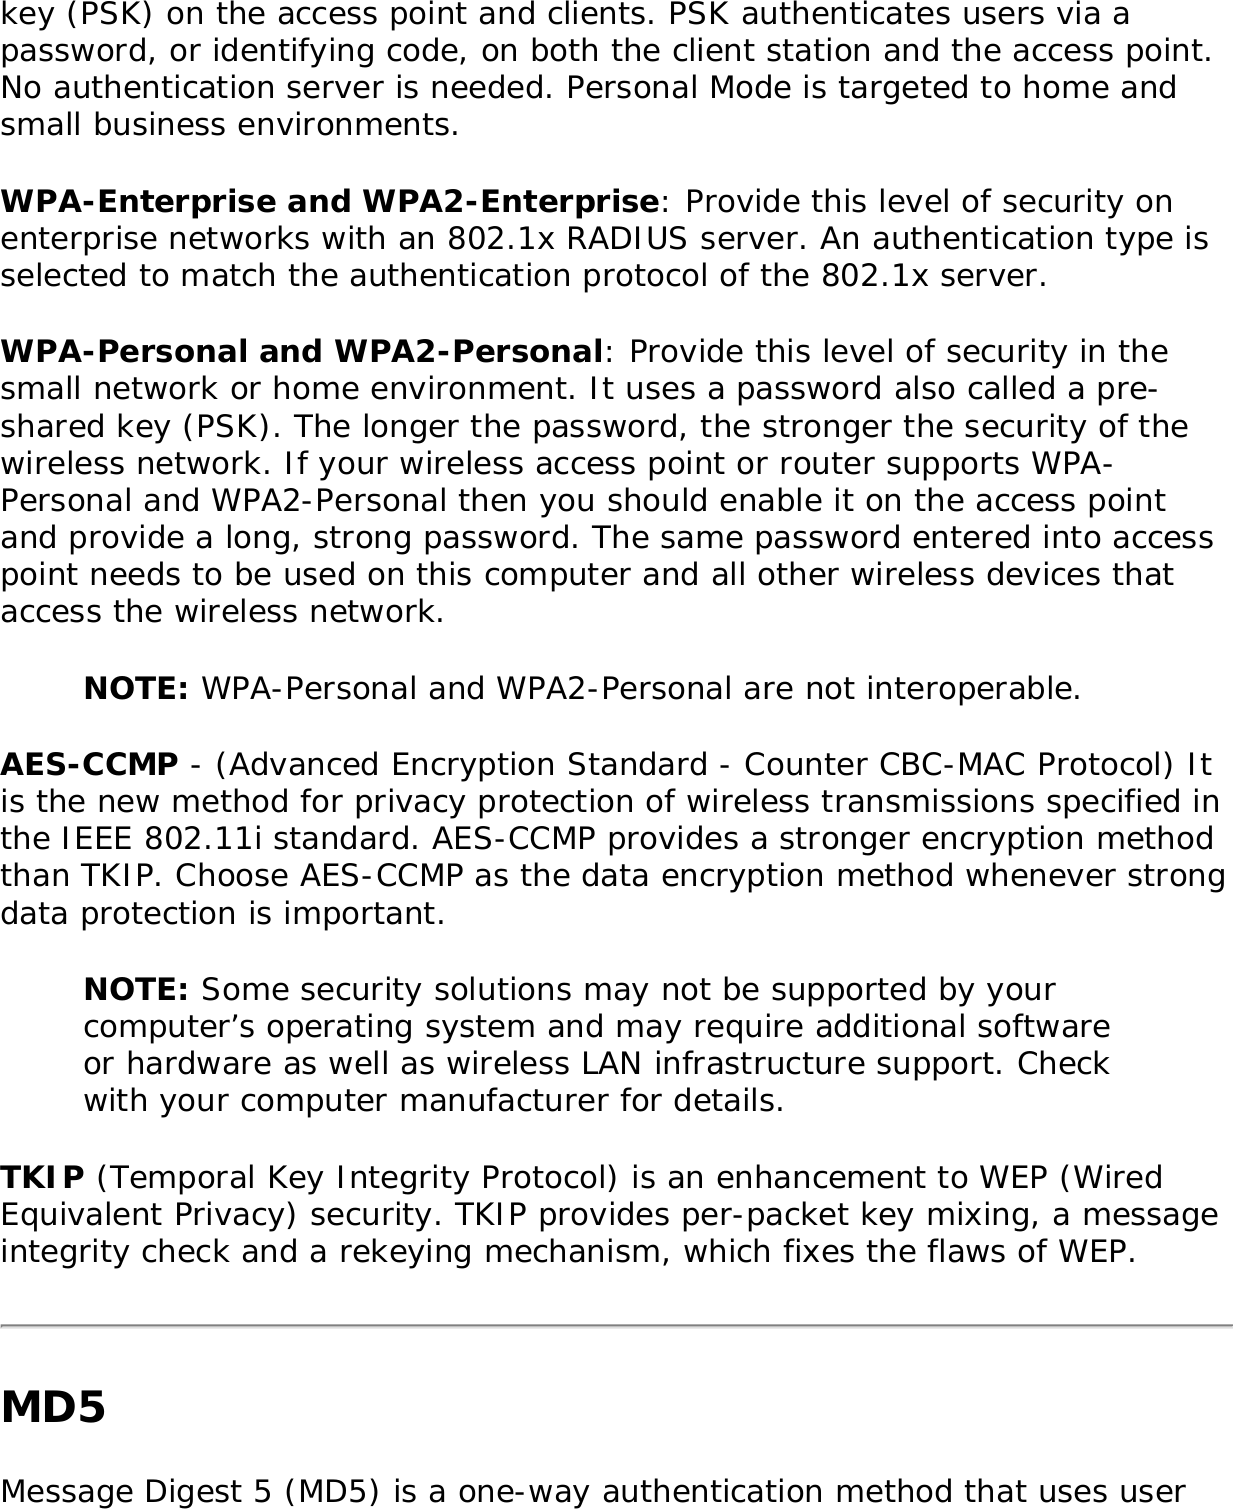 key (PSK) on the access point and clients. PSK authenticates users via a password, or identifying code, on both the client station and the access point. No authentication server is needed. Personal Mode is targeted to home and small business environments. WPA-Enterprise and WPA2-Enterprise: Provide this level of security on enterprise networks with an 802.1x RADIUS server. An authentication type is selected to match the authentication protocol of the 802.1x server. WPA-Personal and WPA2-Personal: Provide this level of security in the small network or home environment. It uses a password also called a pre-shared key (PSK). The longer the password, the stronger the security of the wireless network. If your wireless access point or router supports WPA-Personal and WPA2-Personal then you should enable it on the access point and provide a long, strong password. The same password entered into access point needs to be used on this computer and all other wireless devices that access the wireless network. NOTE: WPA-Personal and WPA2-Personal are not interoperable. AES-CCMP - (Advanced Encryption Standard - Counter CBC-MAC Protocol) It is the new method for privacy protection of wireless transmissions specified in the IEEE 802.11i standard. AES-CCMP provides a stronger encryption method than TKIP. Choose AES-CCMP as the data encryption method whenever strong data protection is important. NOTE: Some security solutions may not be supported by your computer’s operating system and may require additional software or hardware as well as wireless LAN infrastructure support. Check with your computer manufacturer for details. TKIP (Temporal Key Integrity Protocol) is an enhancement to WEP (Wired Equivalent Privacy) security. TKIP provides per-packet key mixing, a message integrity check and a rekeying mechanism, which fixes the flaws of WEP. MD5 Message Digest 5 (MD5) is a one-way authentication method that uses user 